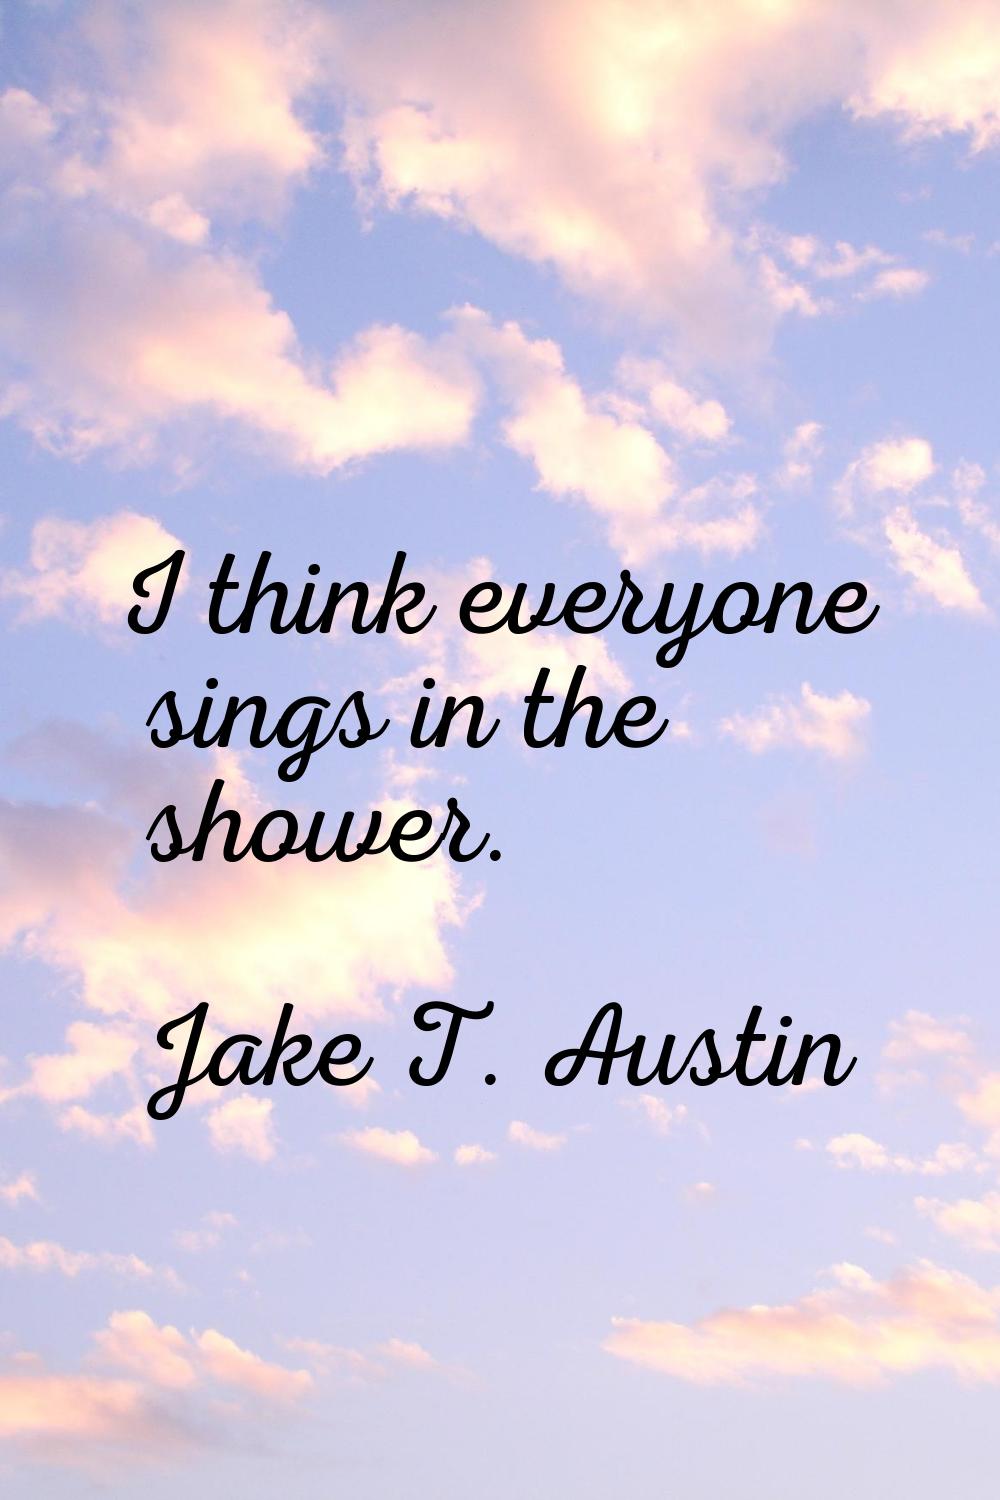 I think everyone sings in the shower.